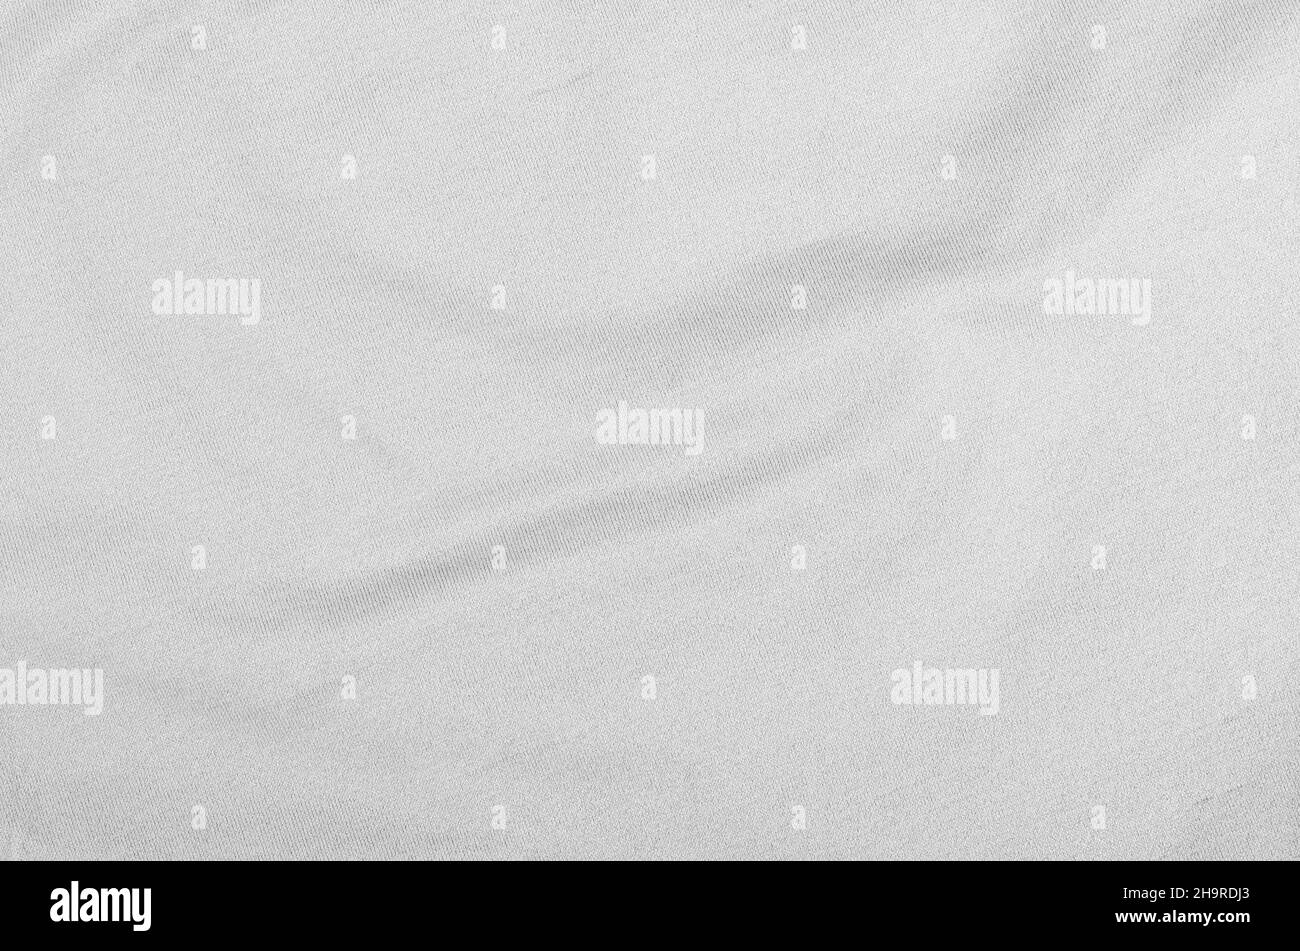 Grey fabric texture for clothes, as background. Stock Photo